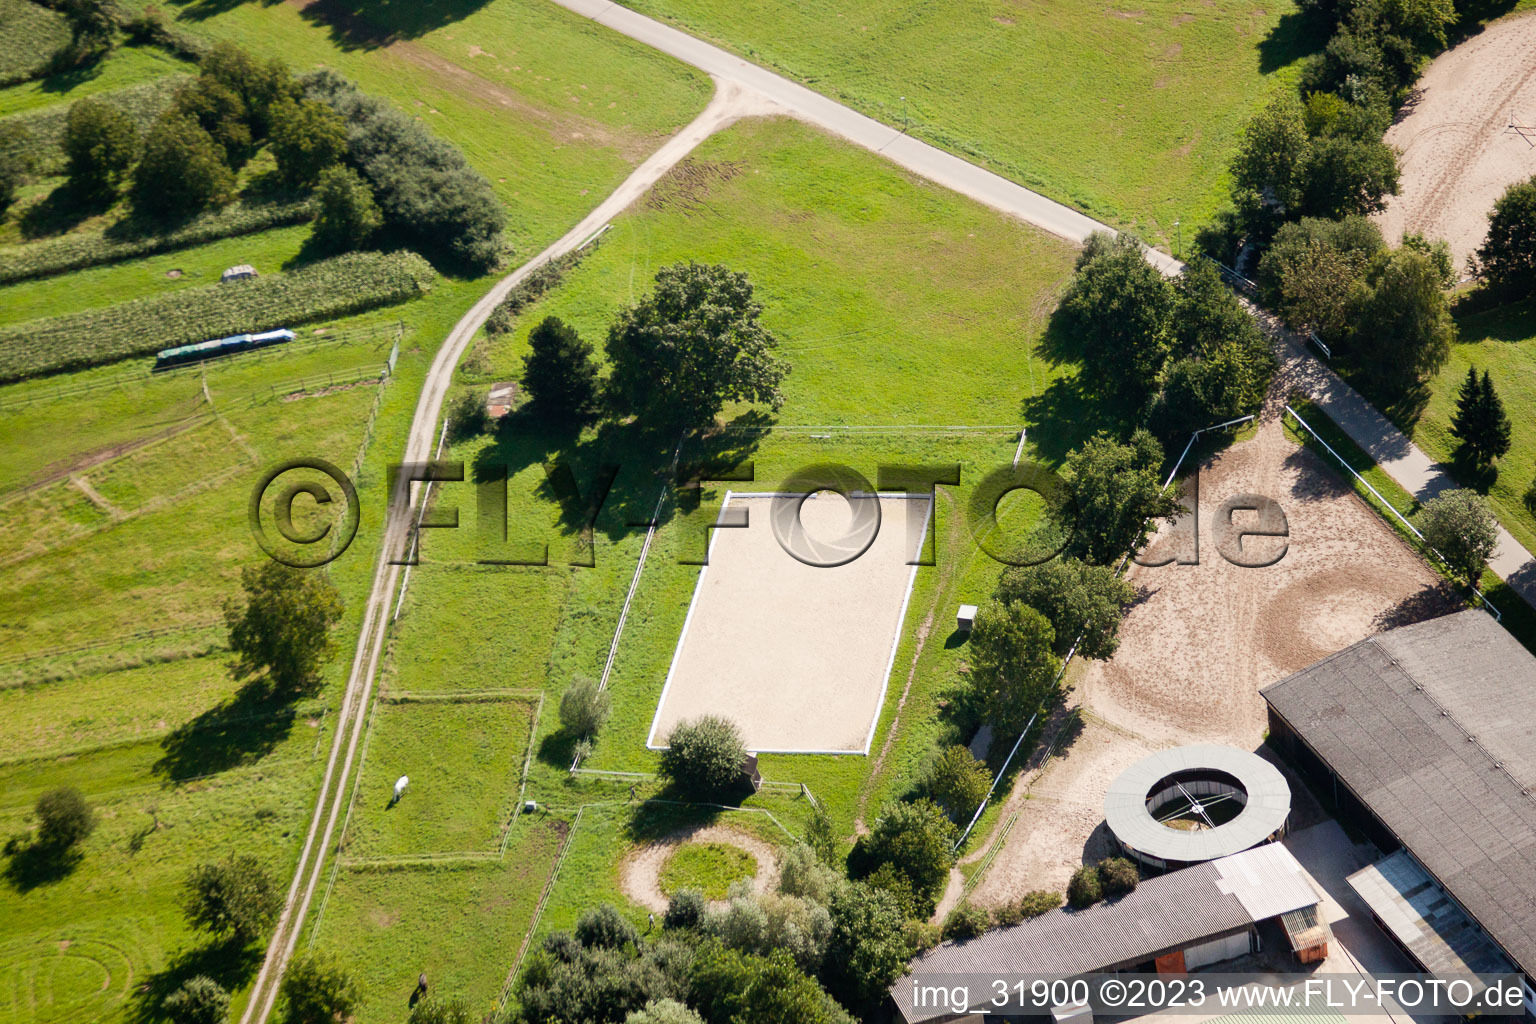 Schafhof horse farm in Muggensturm in the state Baden-Wuerttemberg, Germany from above